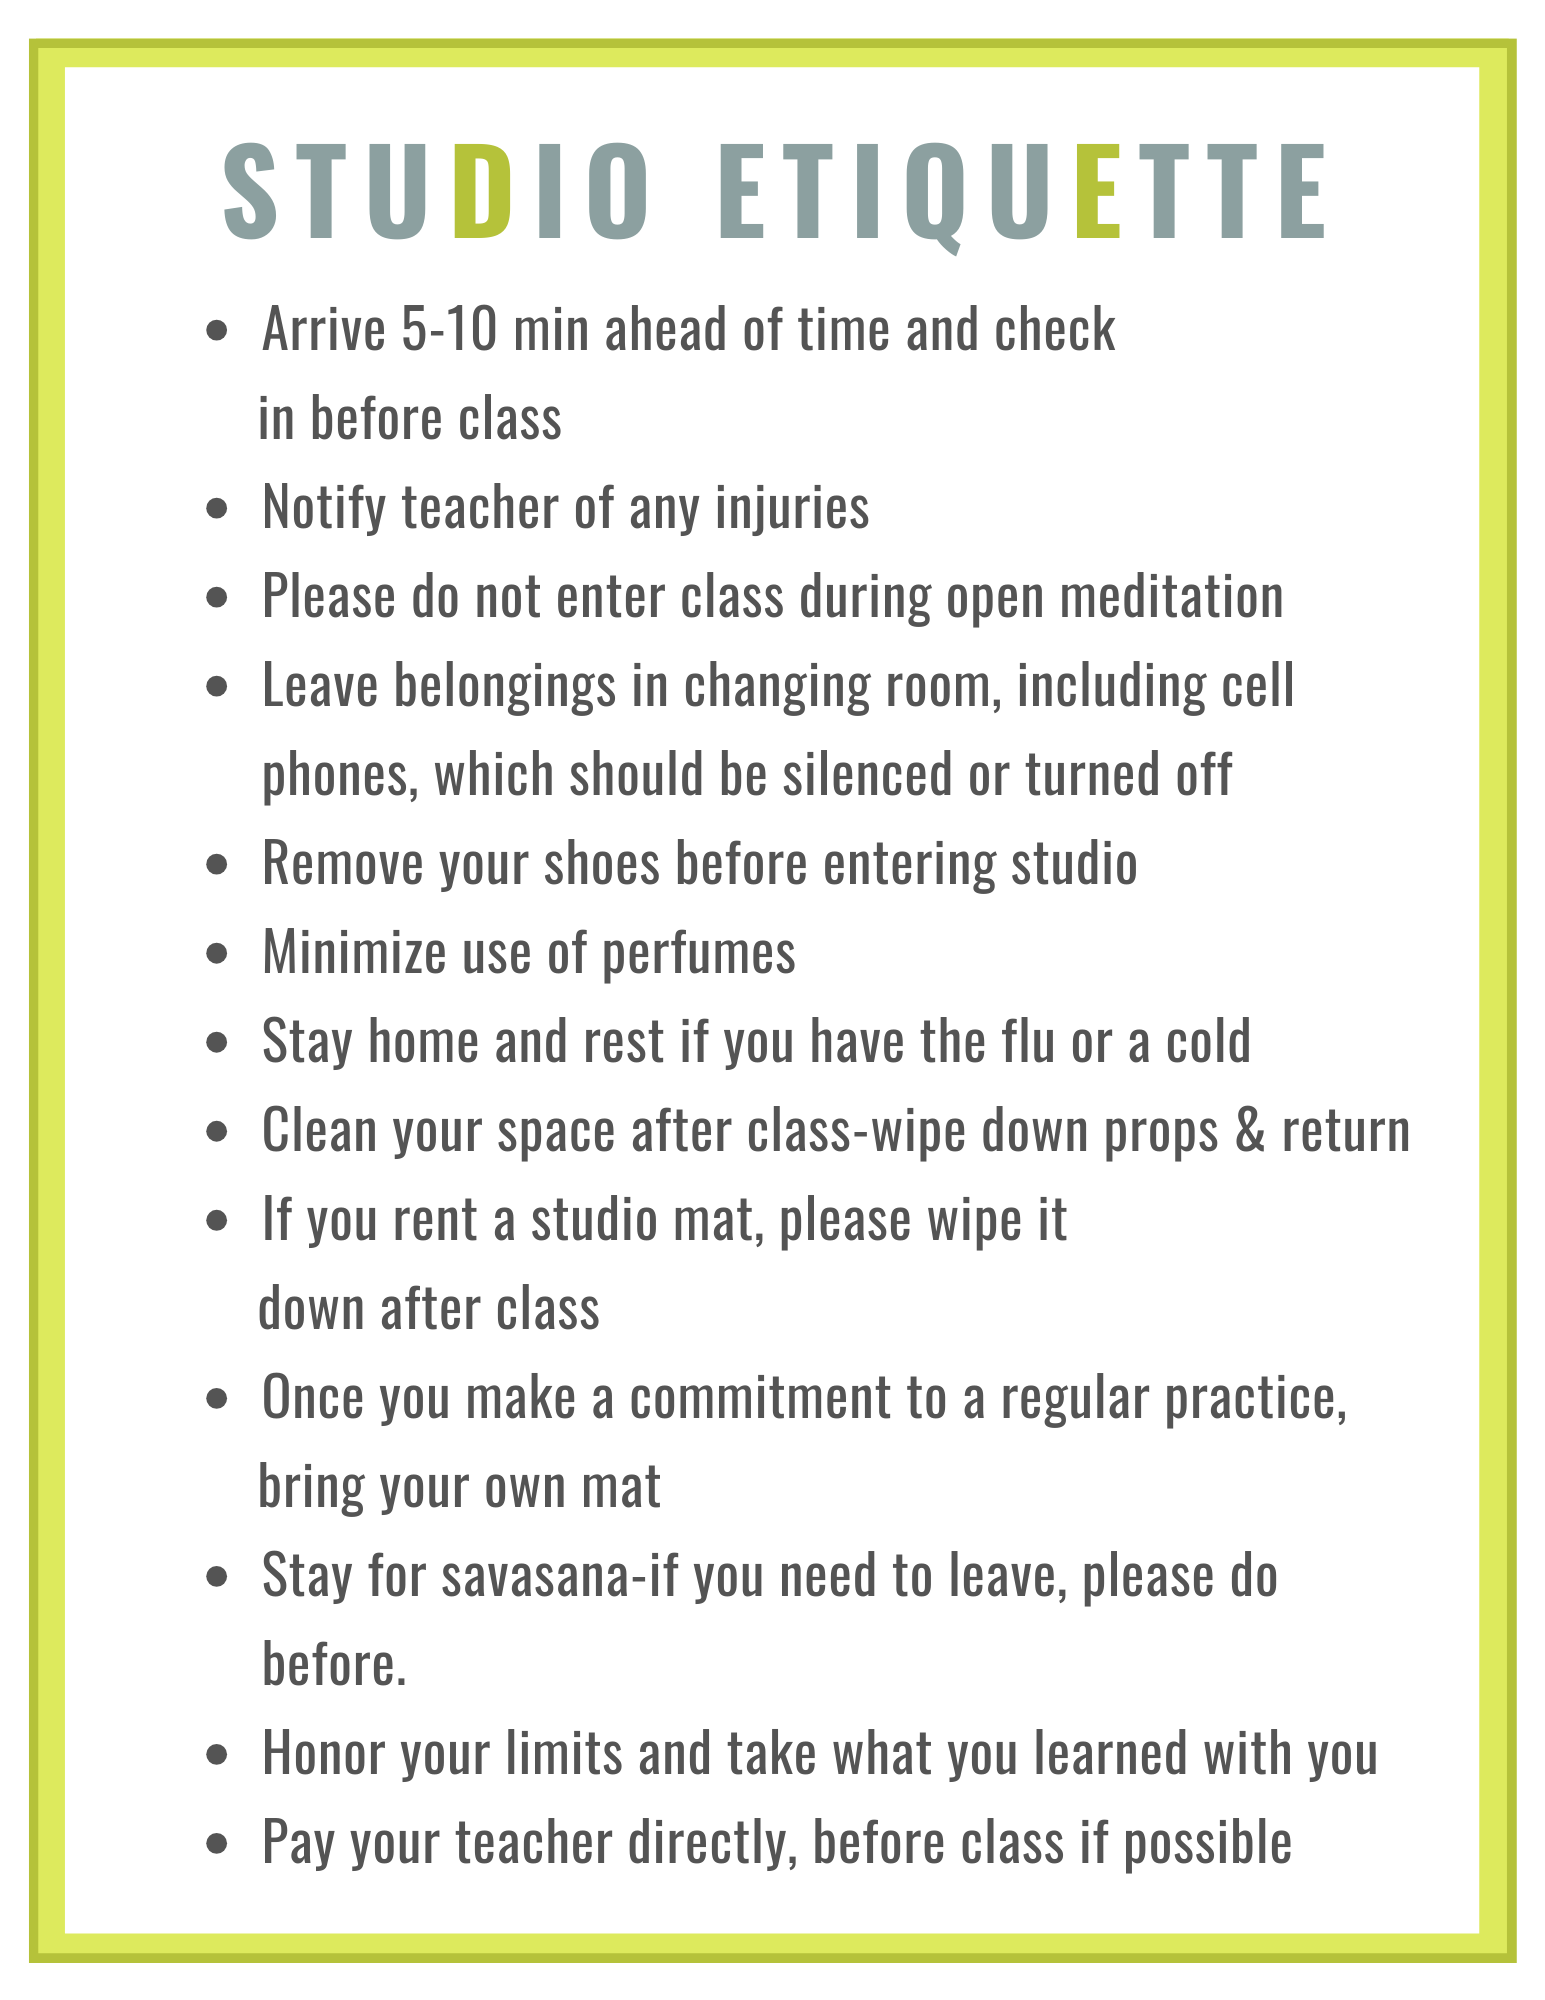 A poster that says studio etiquette on it